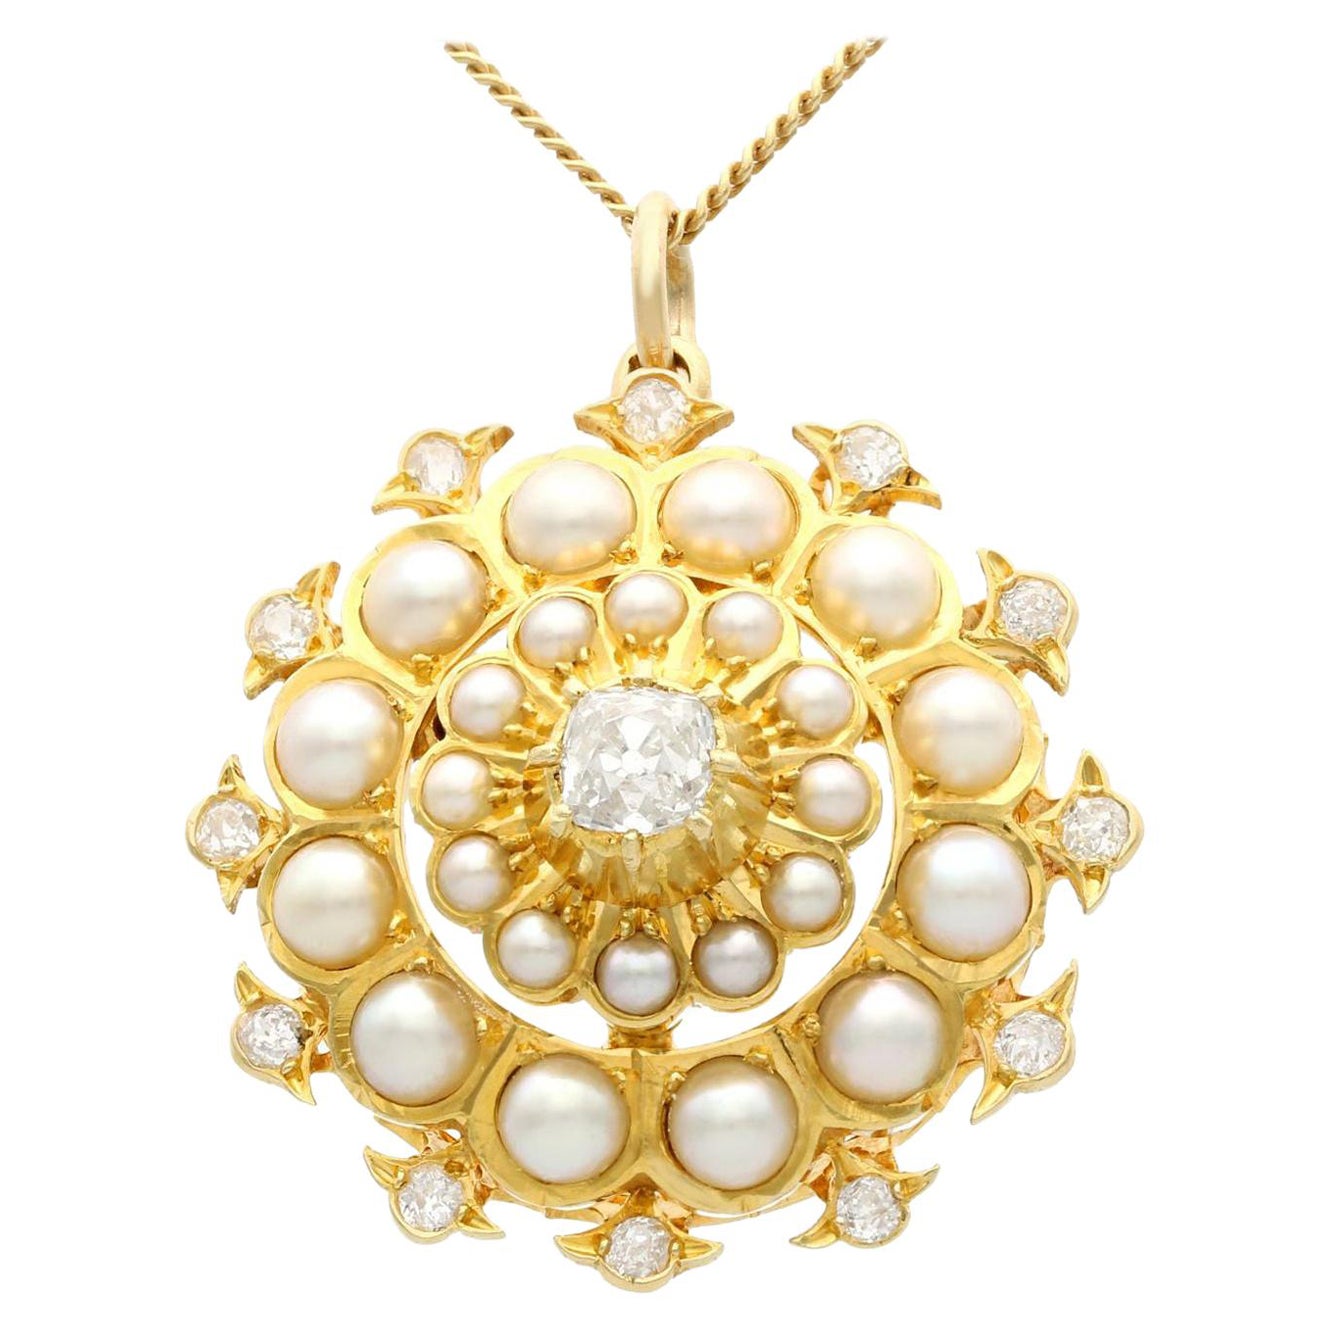 Antique Seed Pearl and 1.16 Carat Diamond Yellow Gold Pendant Brooch